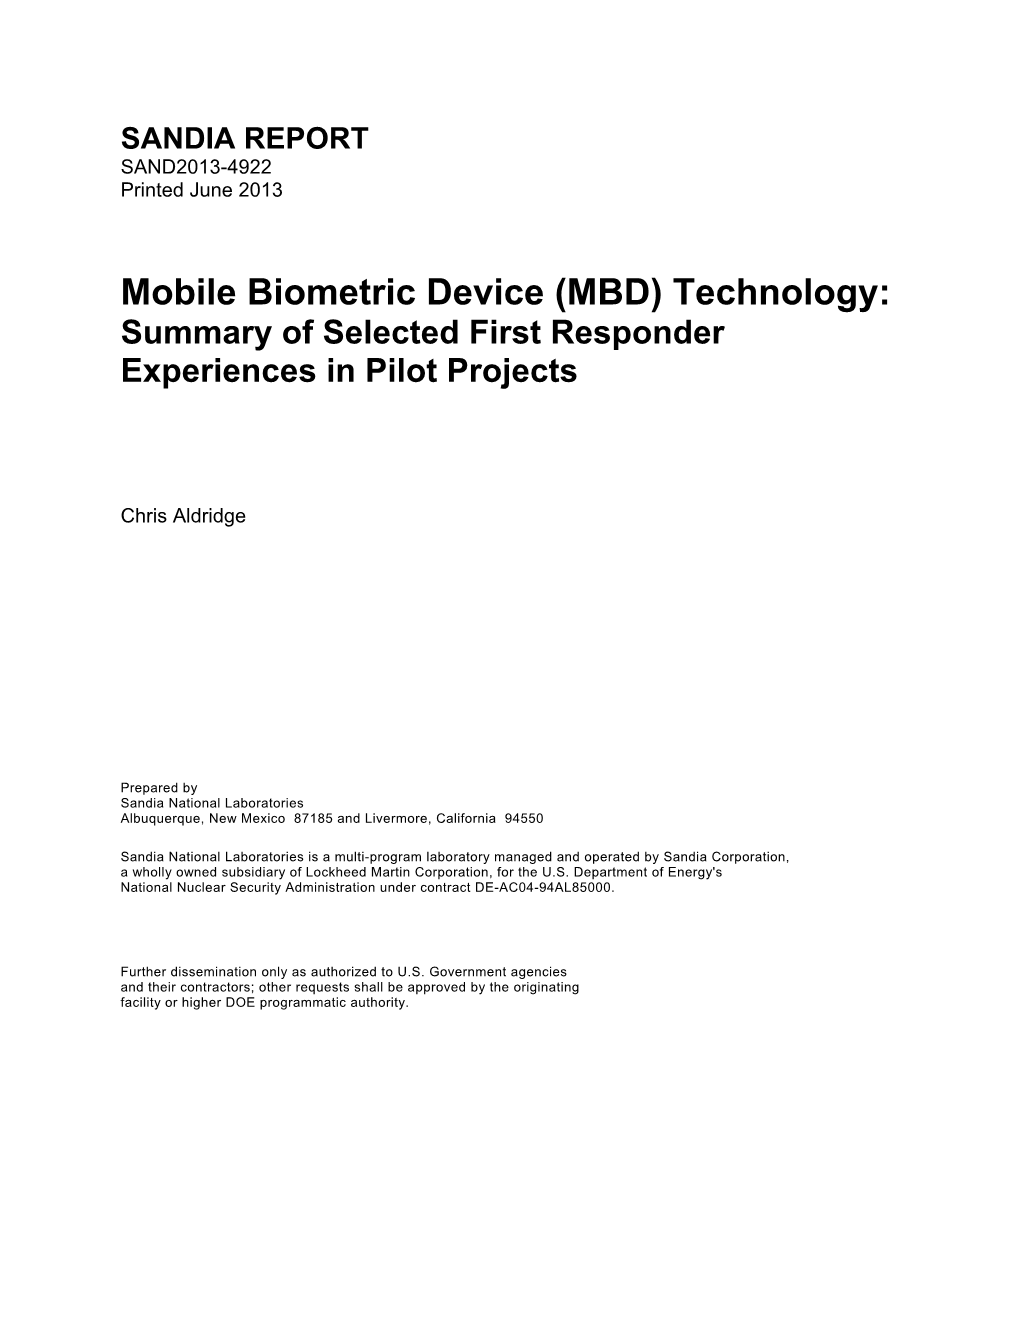 Mobile Biometric Device (MBD) Technology: Summary of Selected First Responder Experiences in Pilot Projects